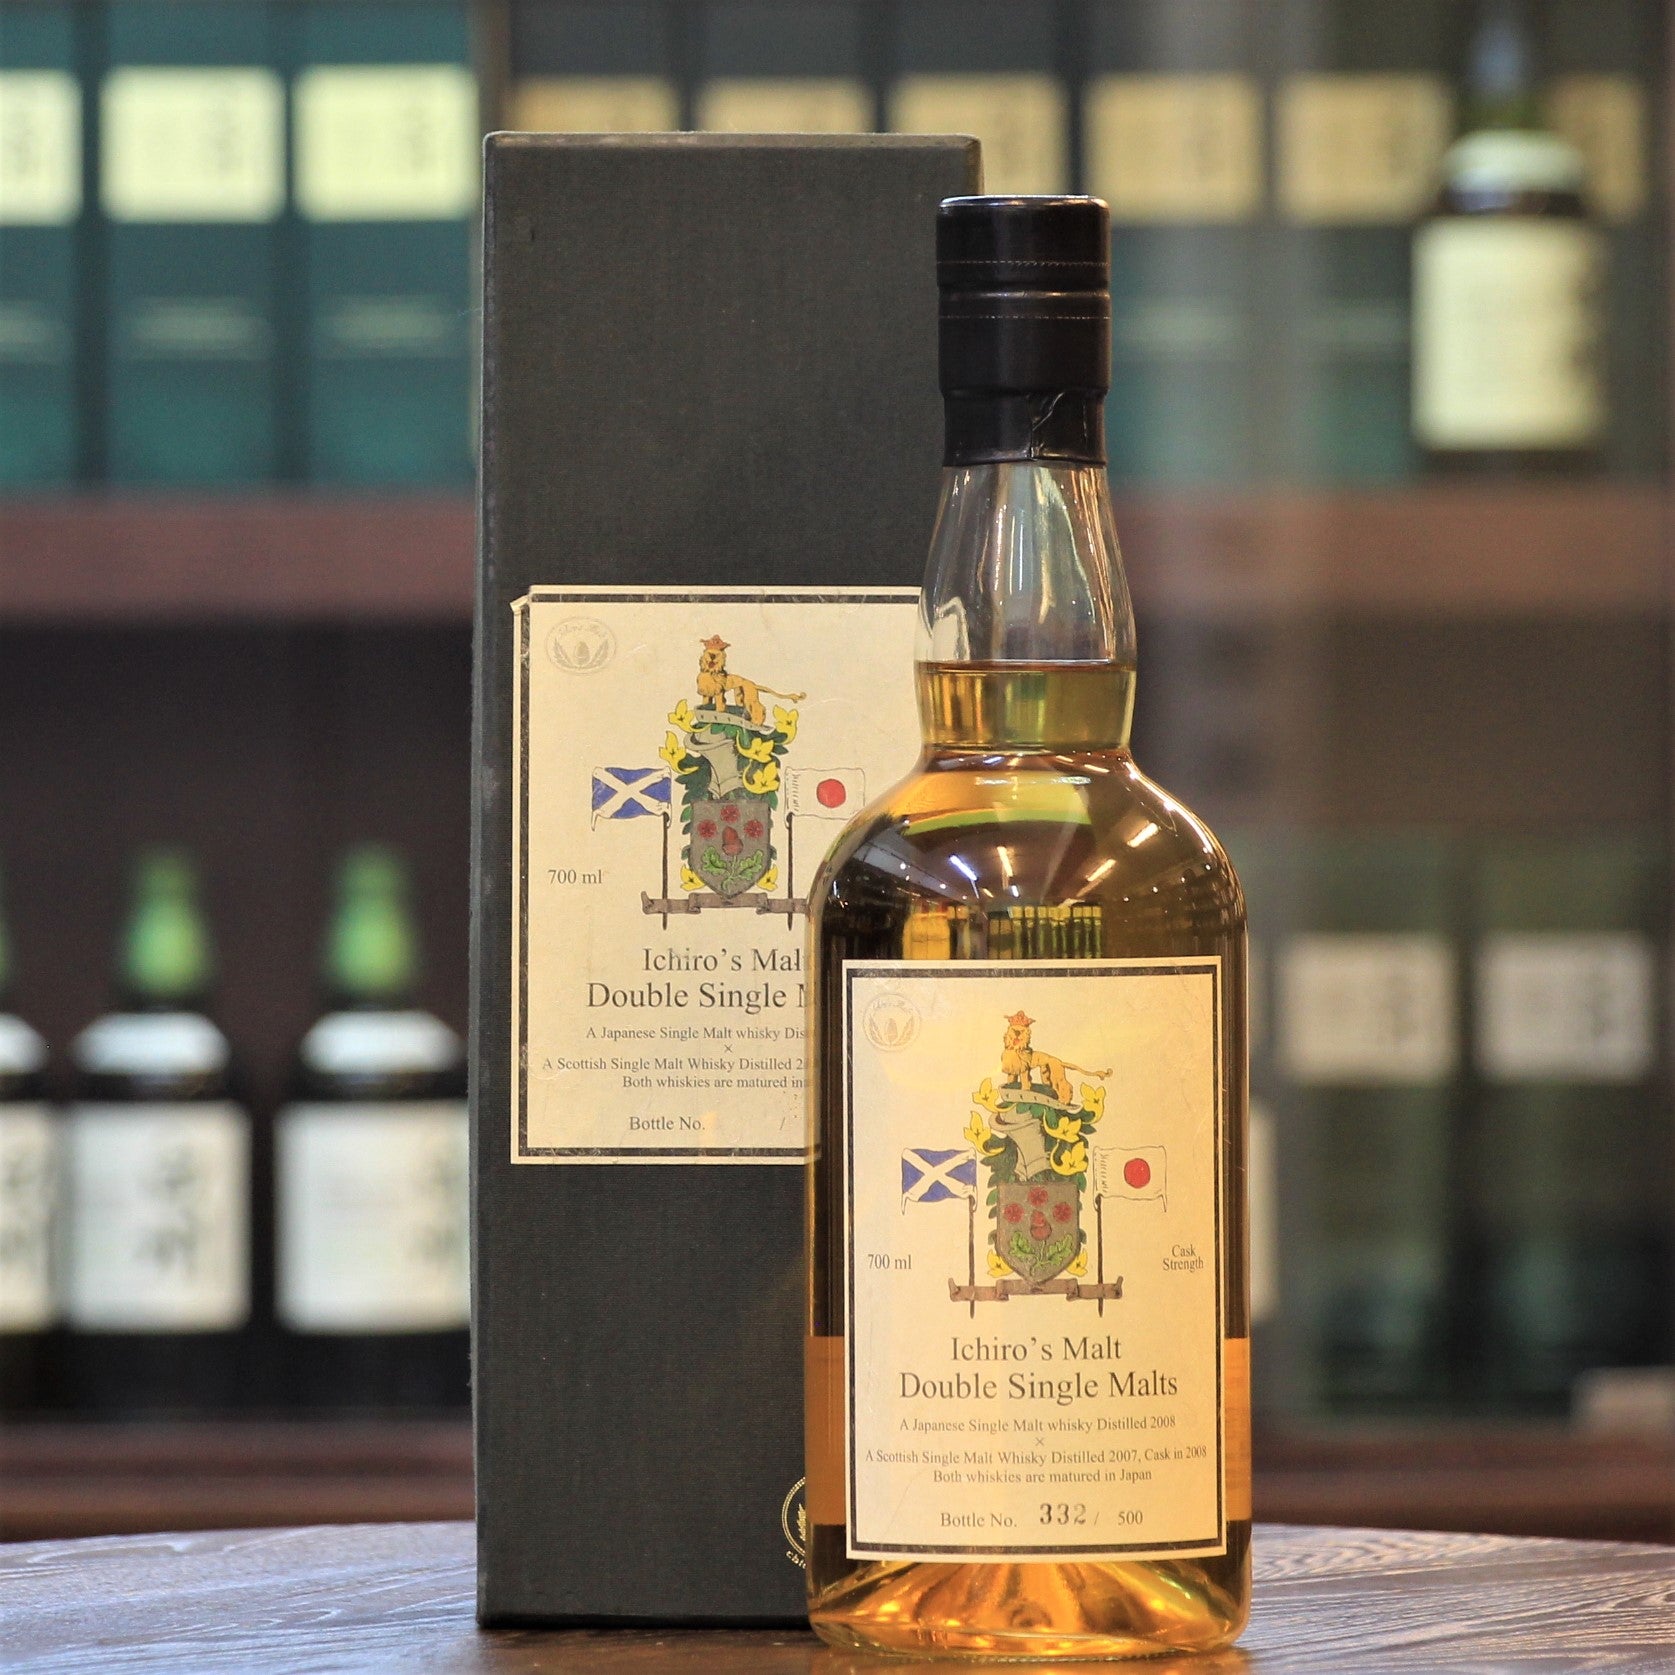 As its name suggests, Ichiro's Malt Double Single Malts is a vatting of two types of single malt whisky: A Japanese Single Malt Whisky distilled in 2008 and A Scottish Single Malt Whisky distilled in 2007. In the cask in 2008, both whiskies were matured in Japan. Bottled at cask strength ABV of 62%, only 500 bottles were released. This bottle is #332 of 500. A perfect example of the blending skills of Ichiro Akuto, for which he has won several awards globally.